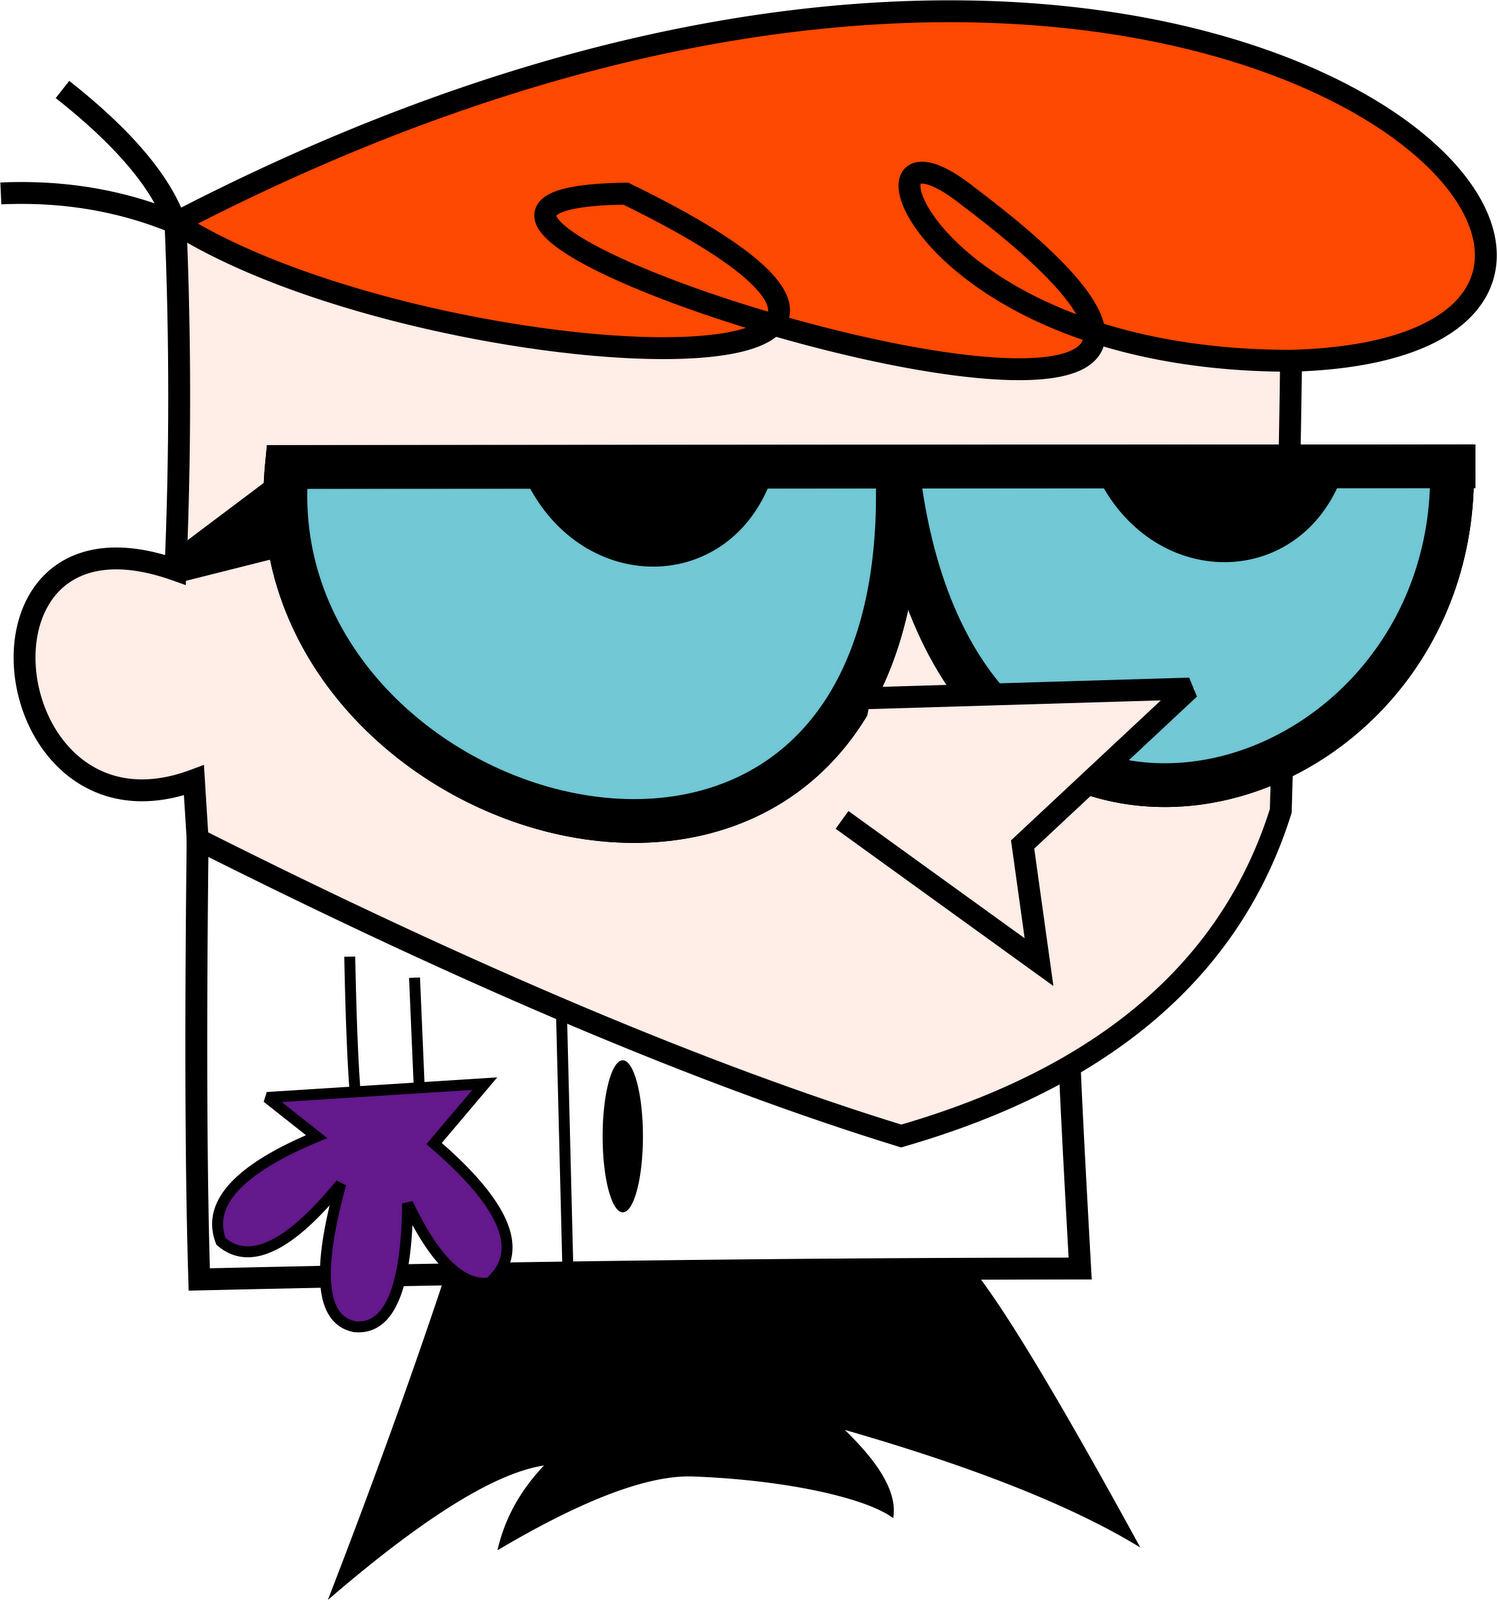 dexter the lab download free